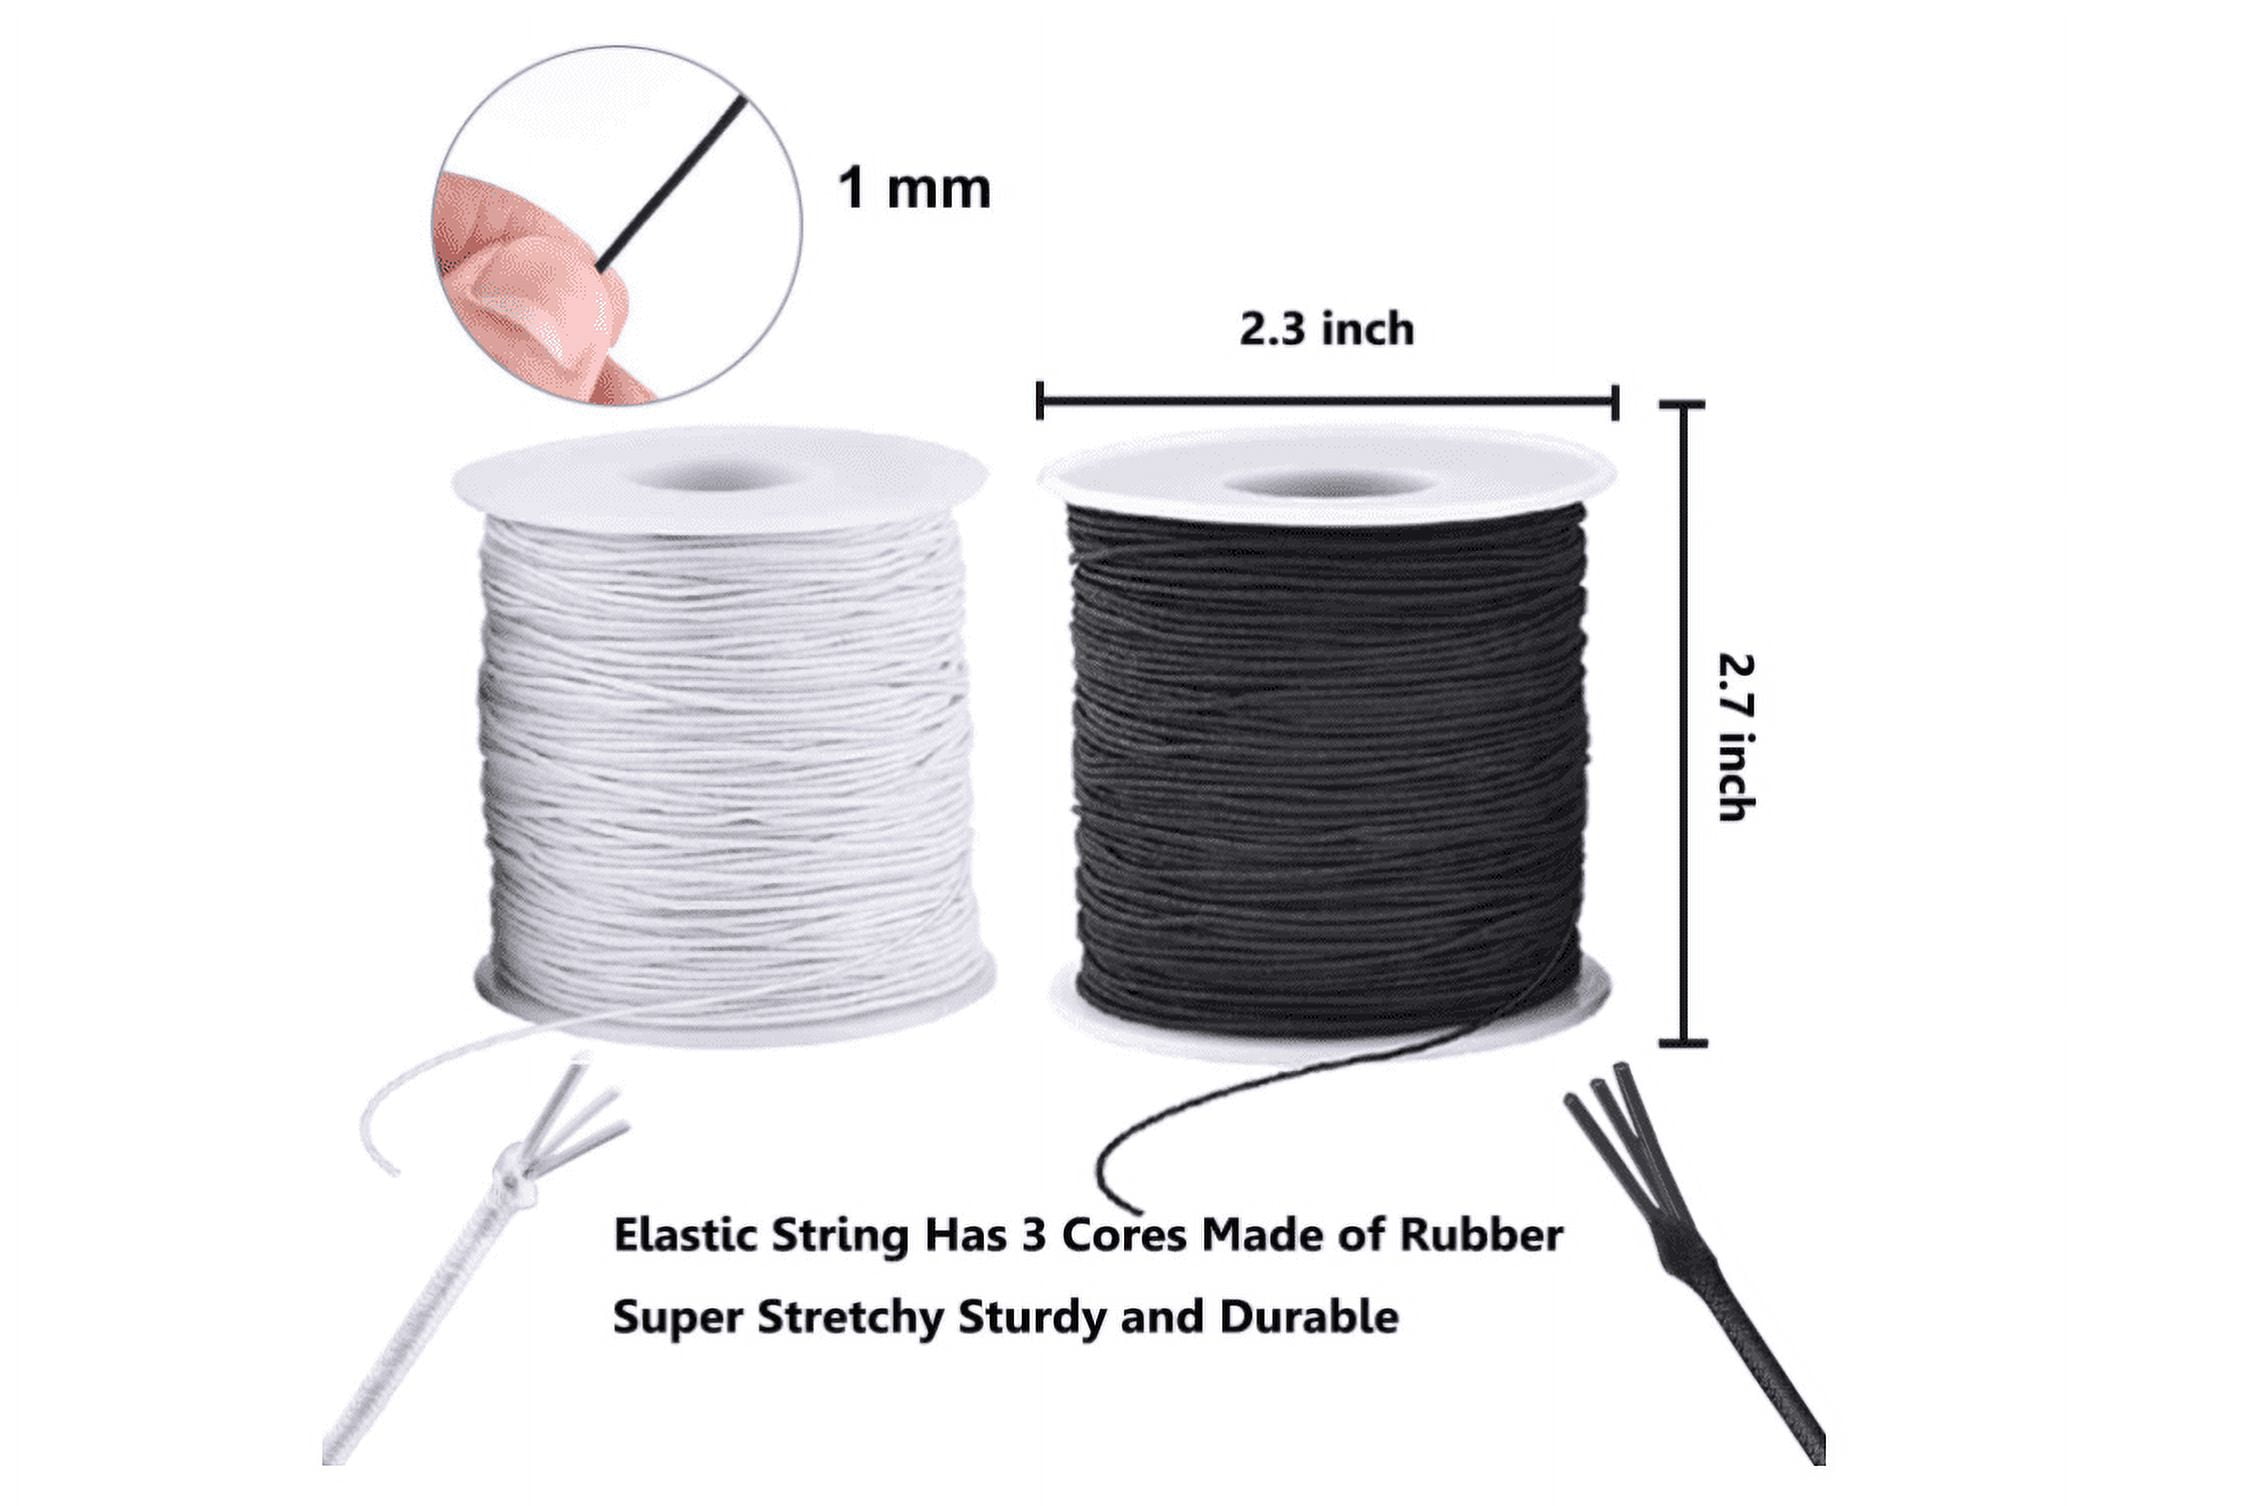 ChunLiou Elastic Cord for Bracelets, 1 mm 330 Feet Durable Bracelet String, Stretch Elastic String for Jewelry Making, Necklaces and B, Black